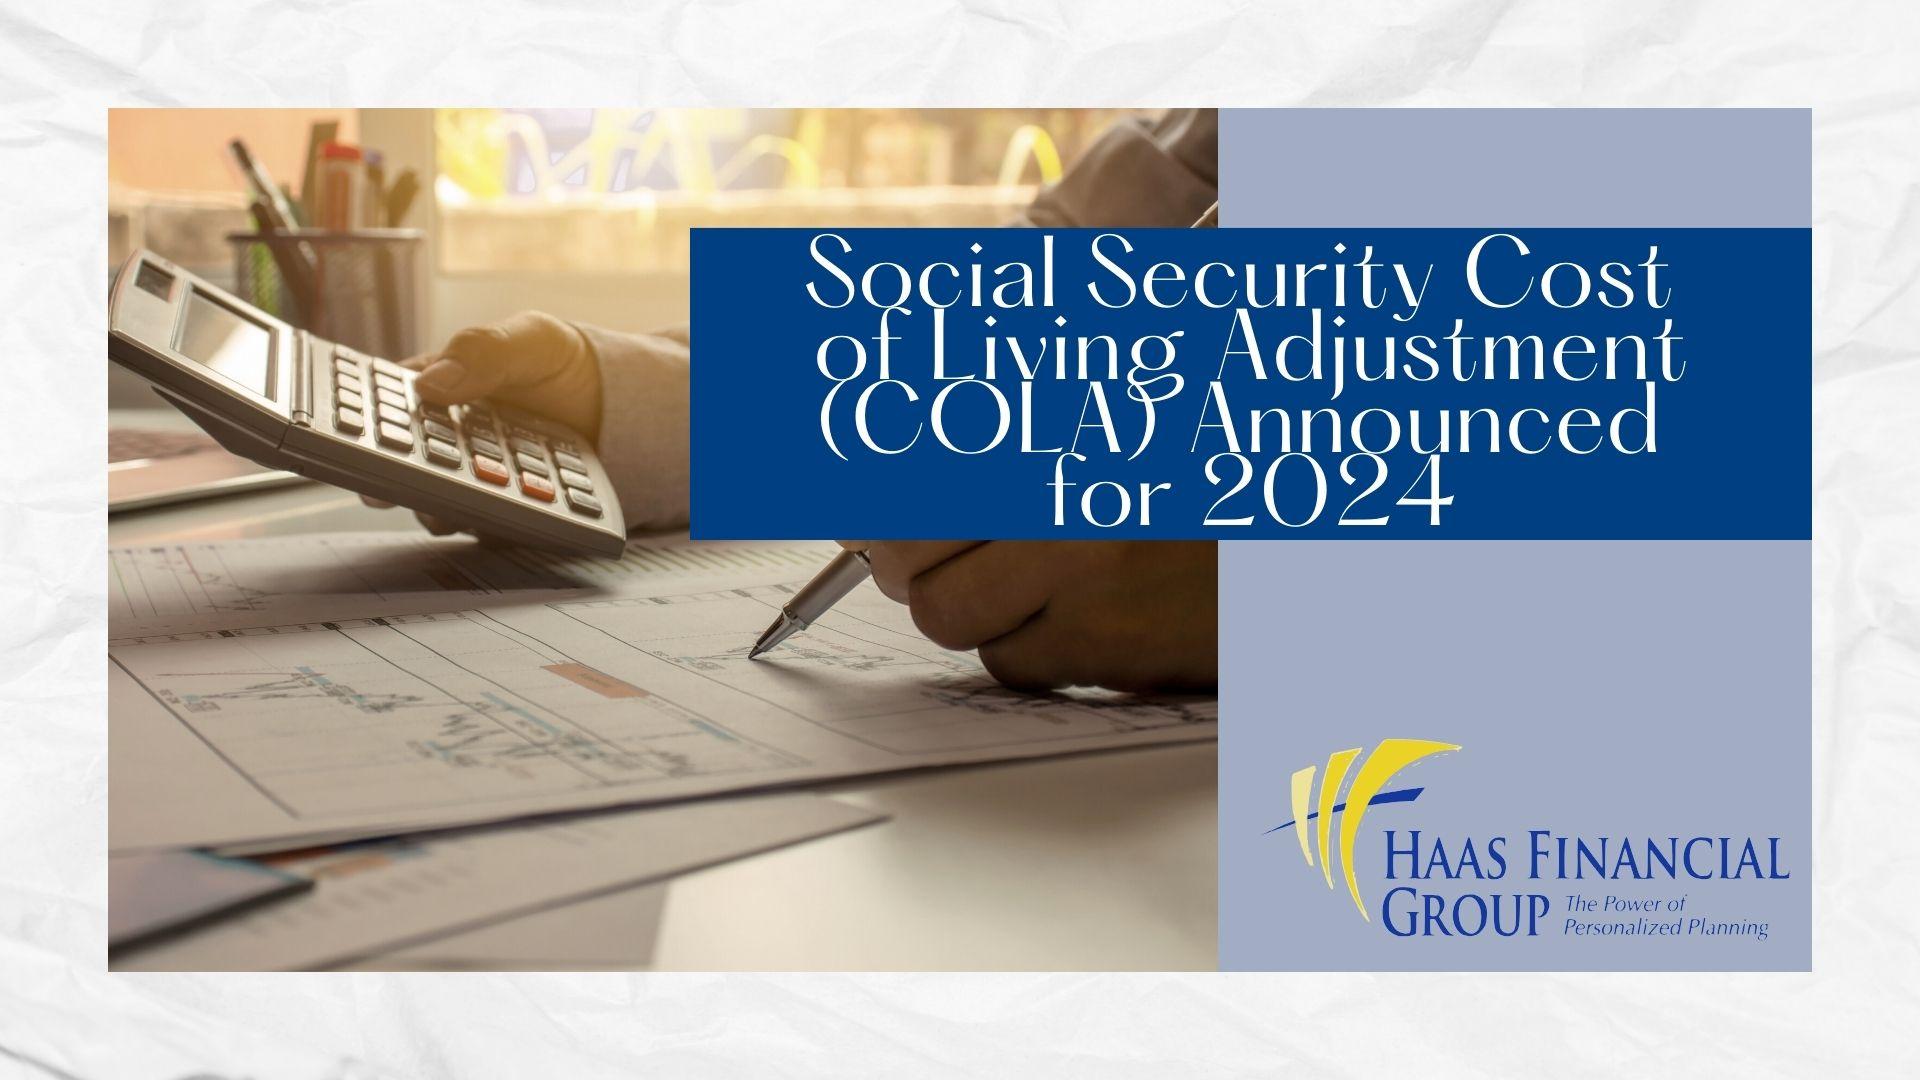 Social Security Cost of Living Adjustment (COLA) Announced for 2024